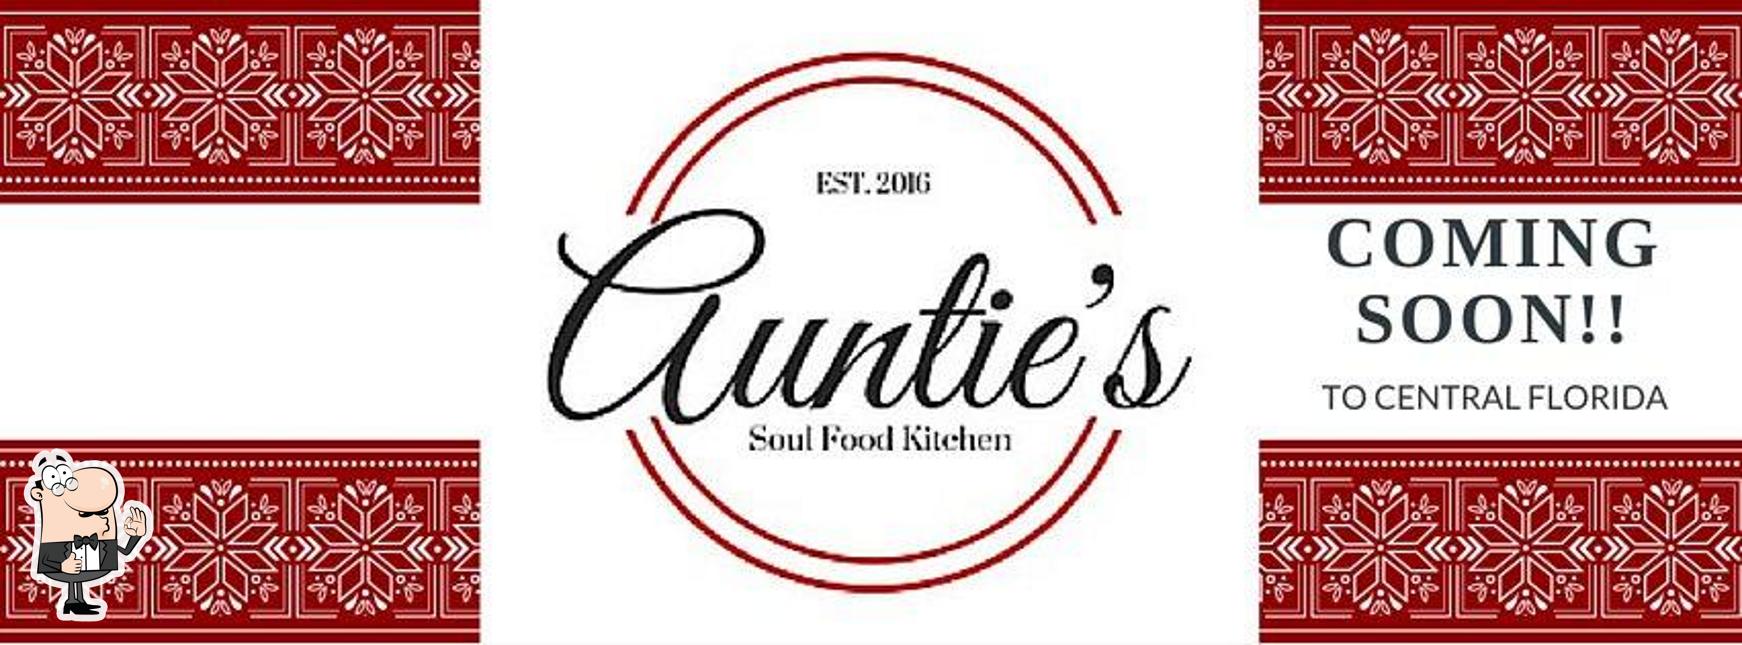 See this photo of Auntie 's Soul Food Kitchen